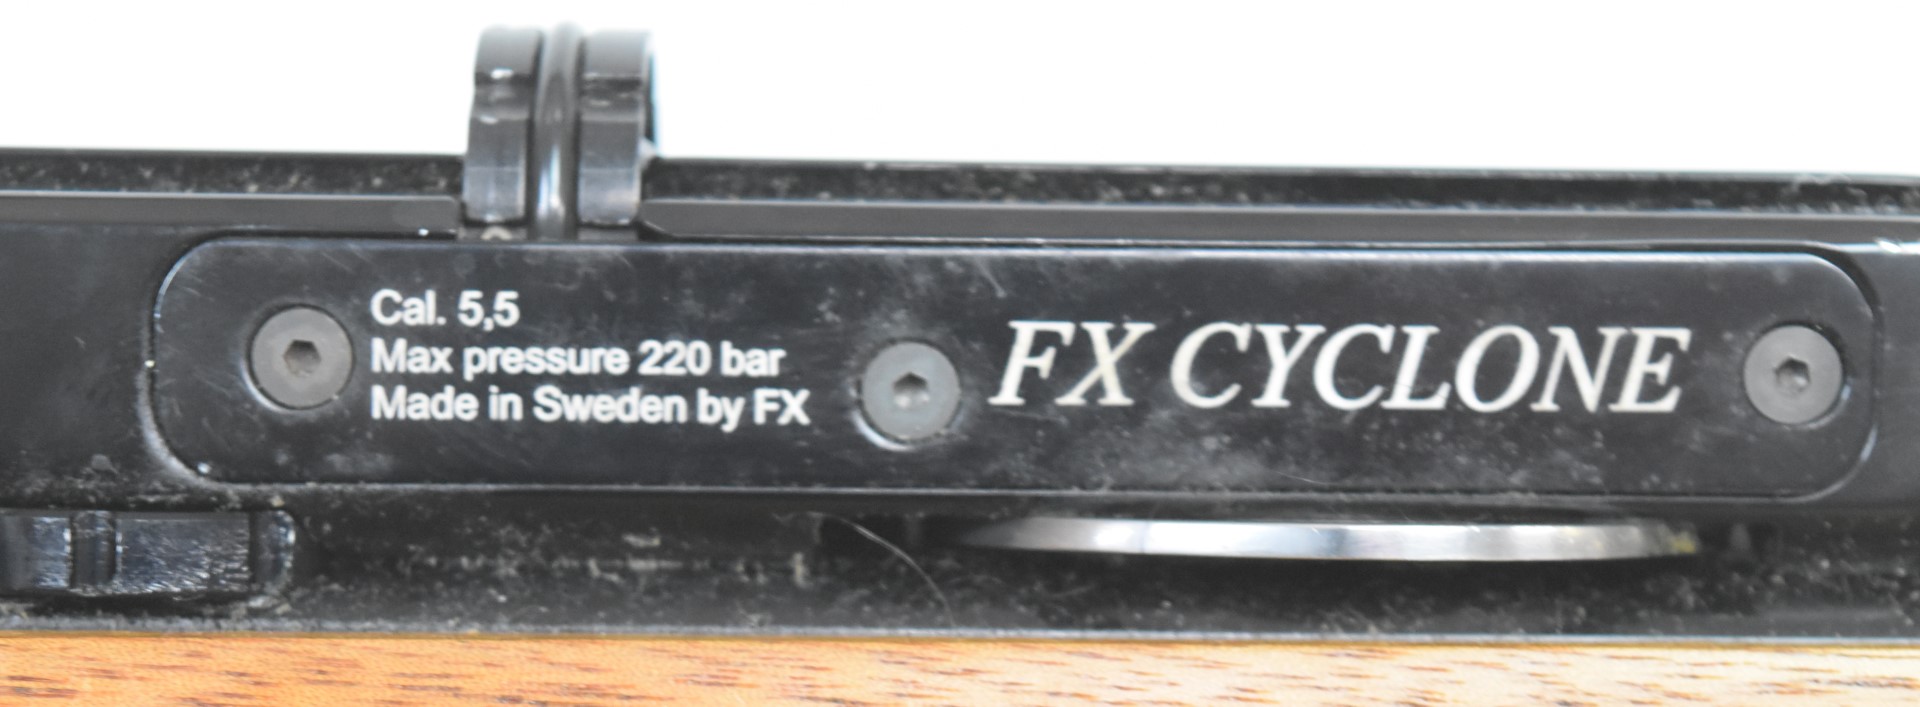 FX Cyclone .22 FAC PCP air rifle with textured semi-pistol grip and forend, raised cheek piece, - Image 10 of 10